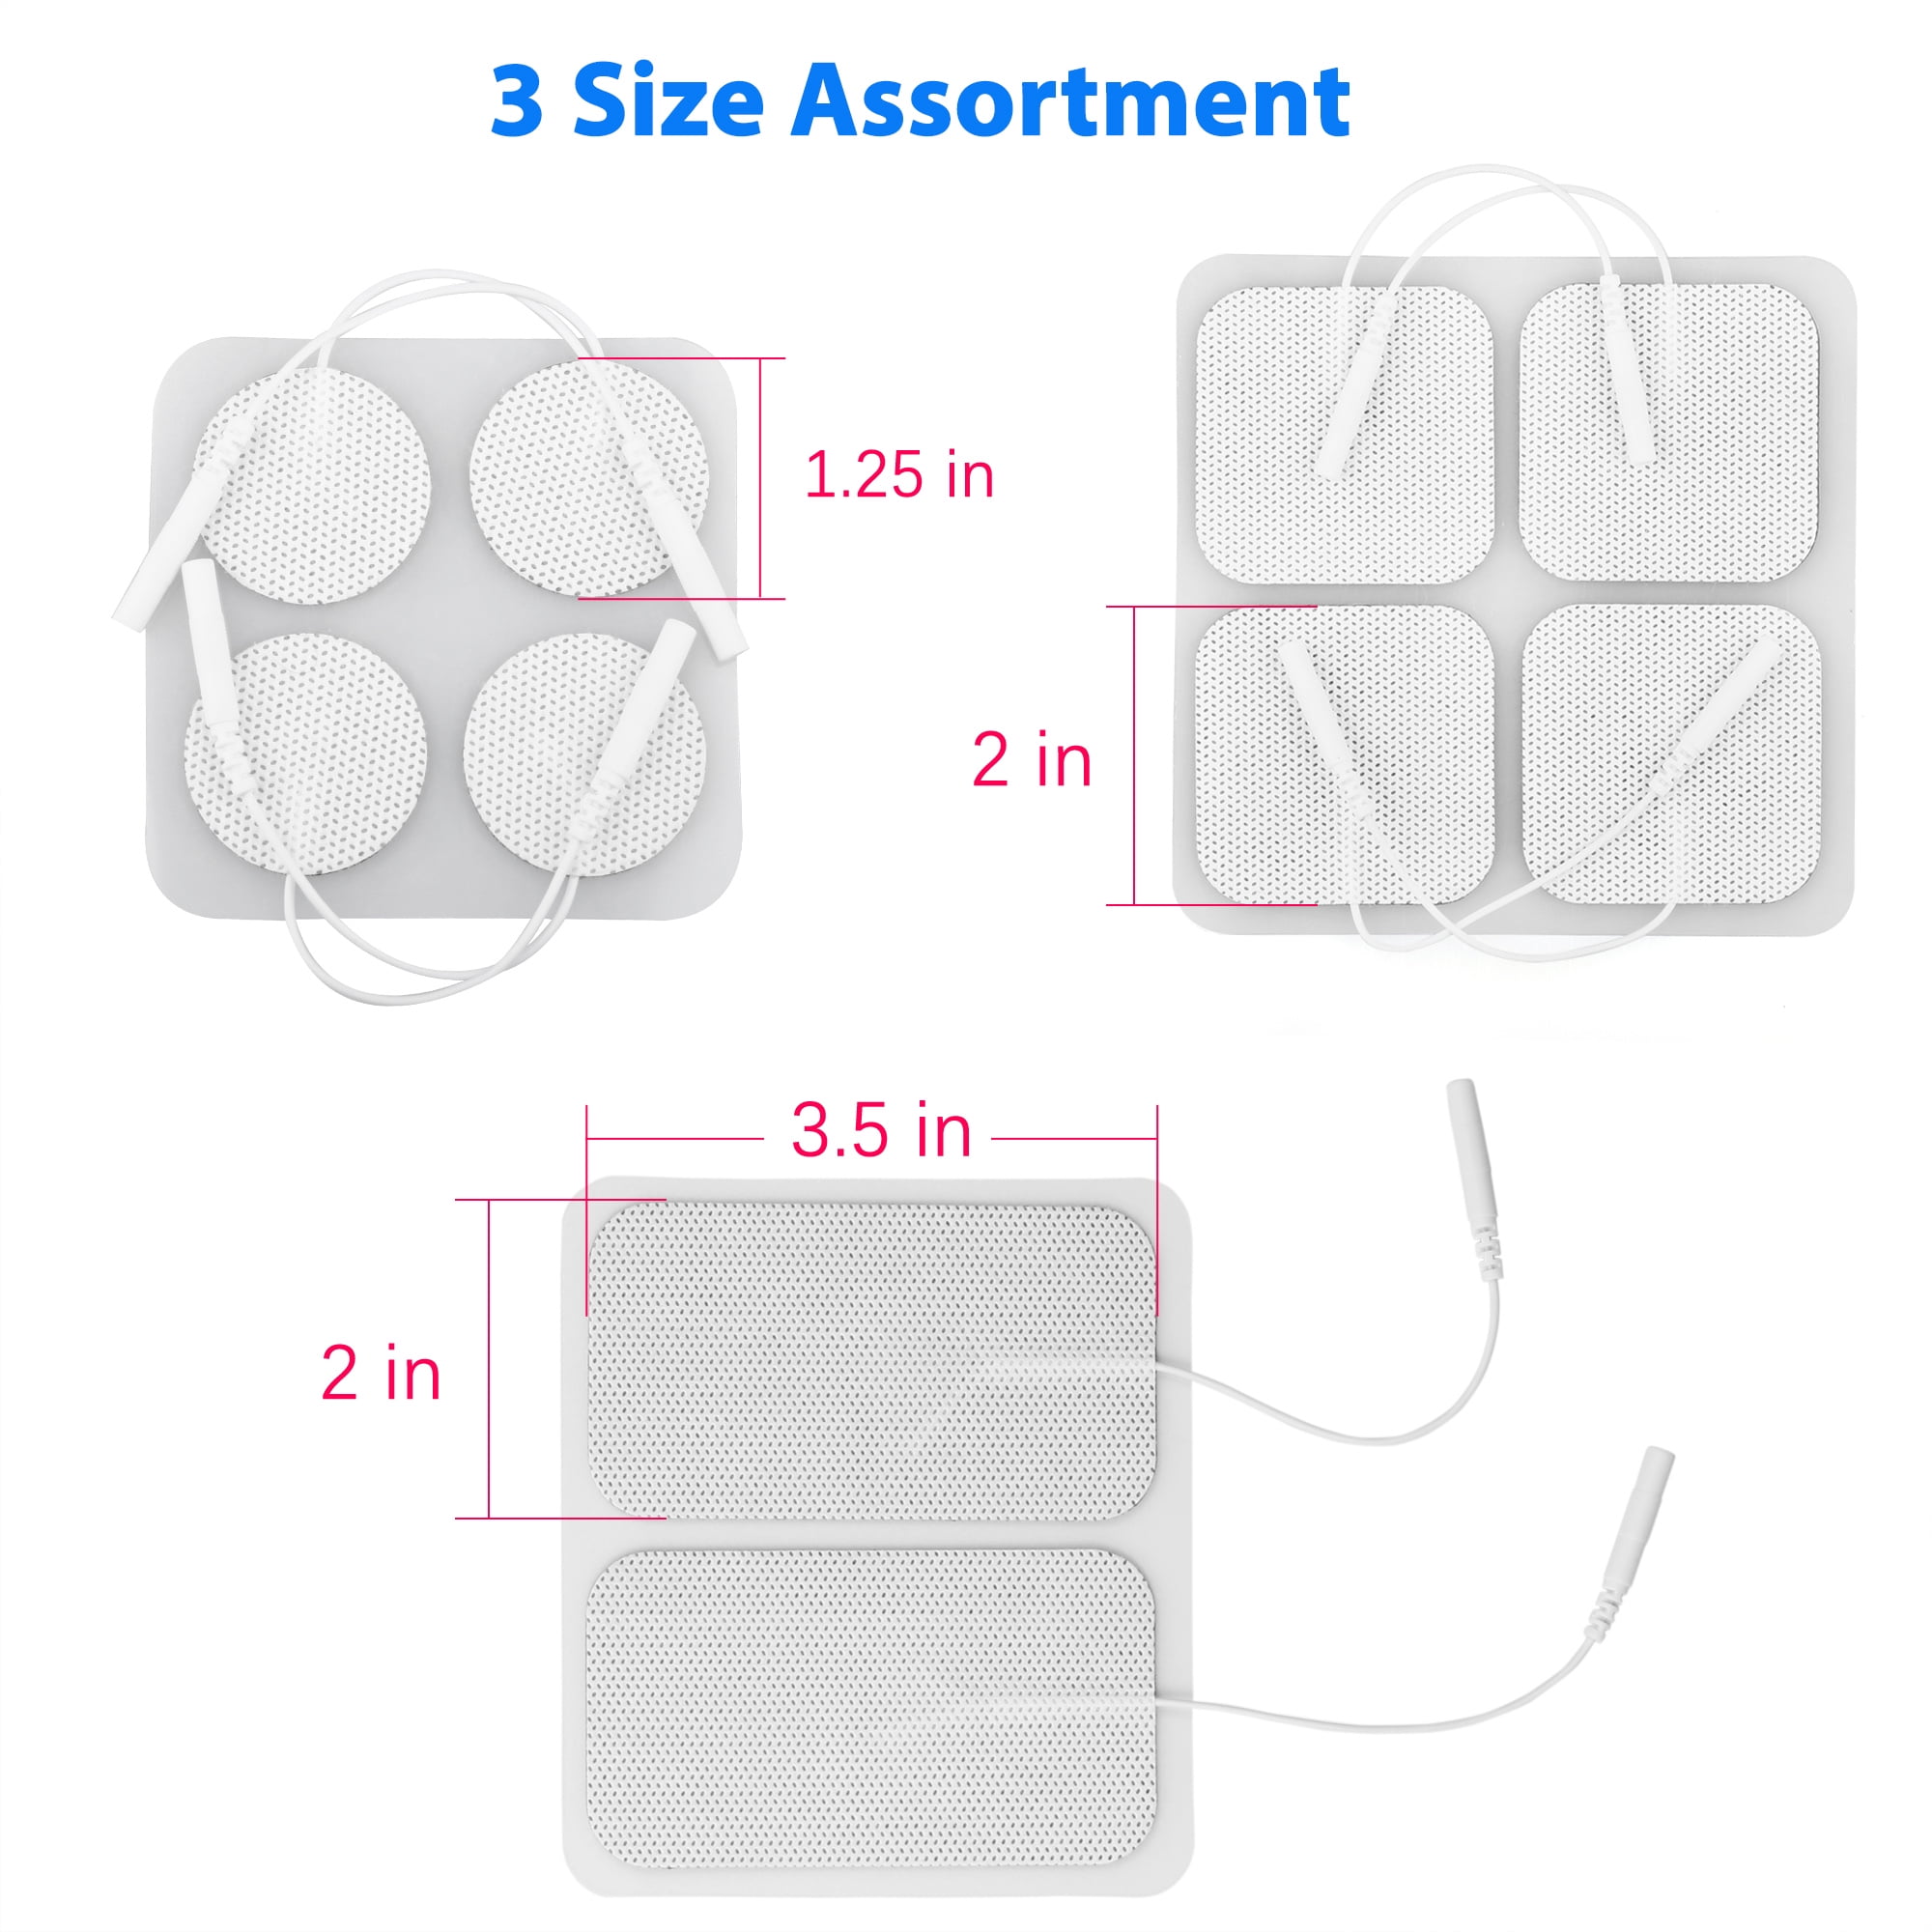 TENS Unit Replacement Pads TENS Unit Pads Electrodes Pads 2”x 4”16Pack  Reusable Self-Adhesive Pads(pin-in),Latex-Free,for Self-Adhesive TENS Pads  for